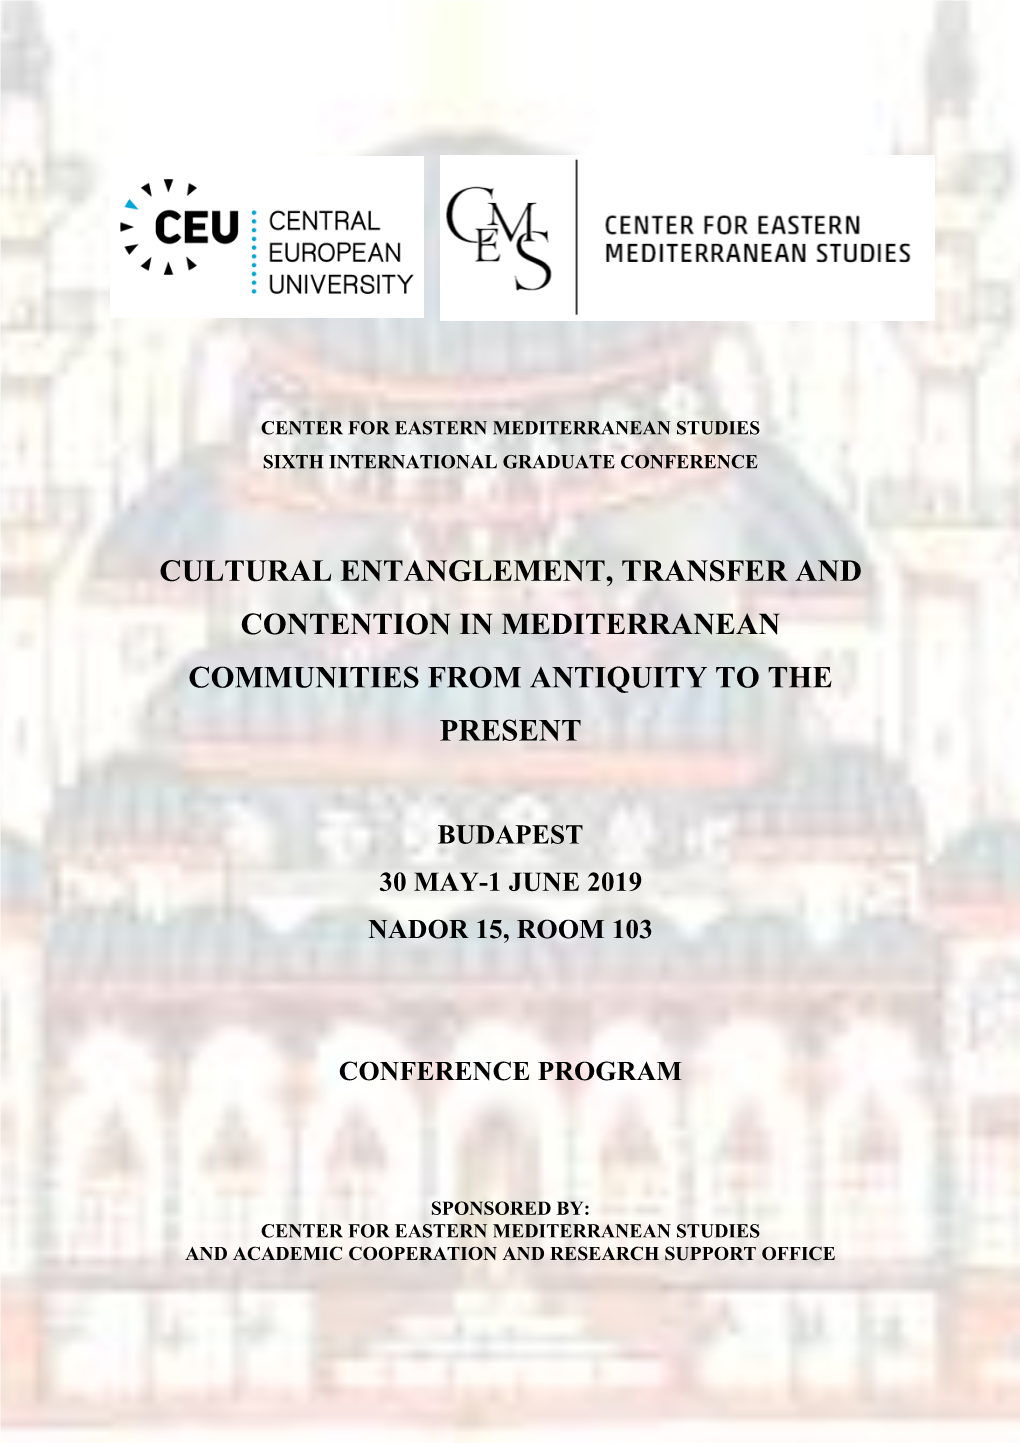 Cultural Entanglement, Transfer and Contention in Mediterranean Communities from Antiquity to the Present